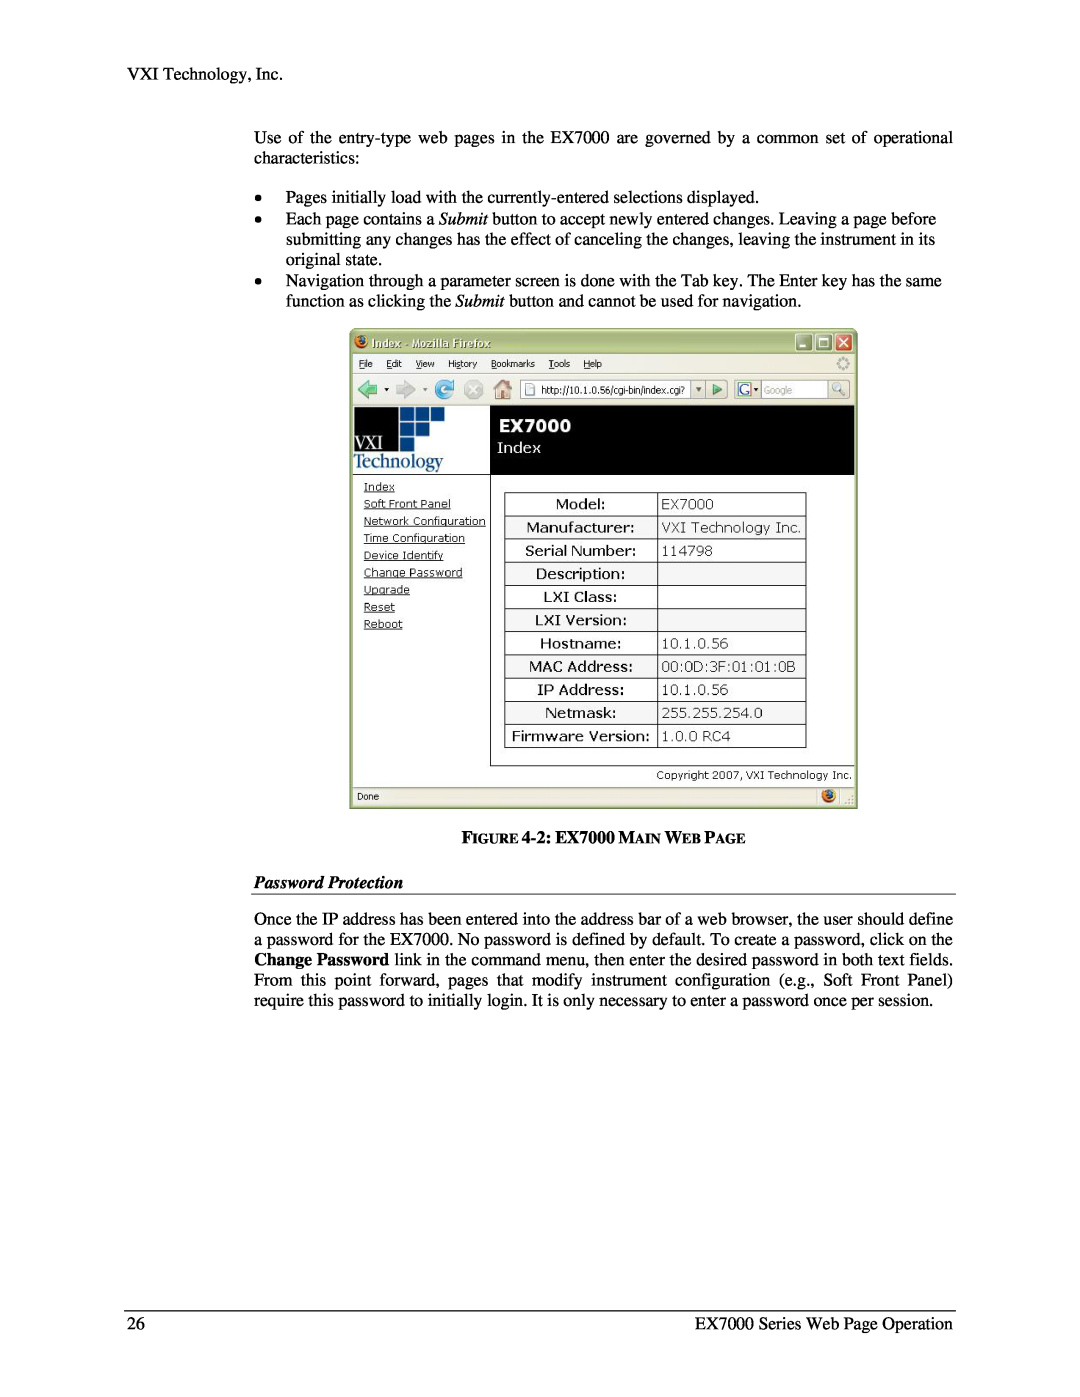 VXI user manual 2 EX7000 MAIN WEB PAGE, Password Protection 